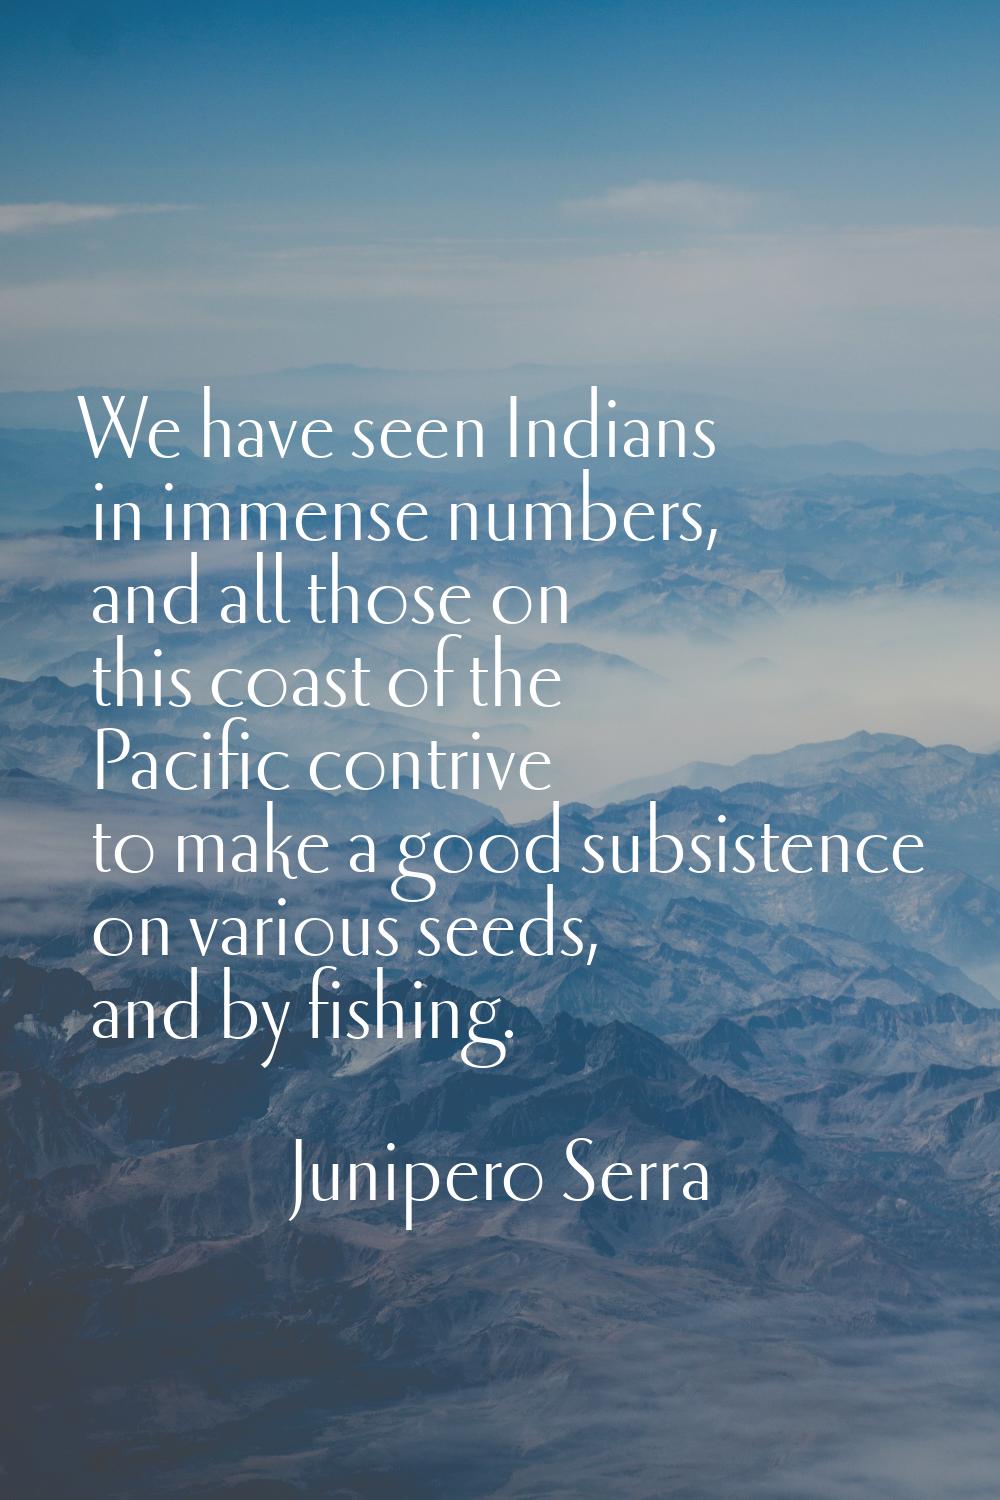 We have seen Indians in immense numbers, and all those on this coast of the Pacific contrive to mak